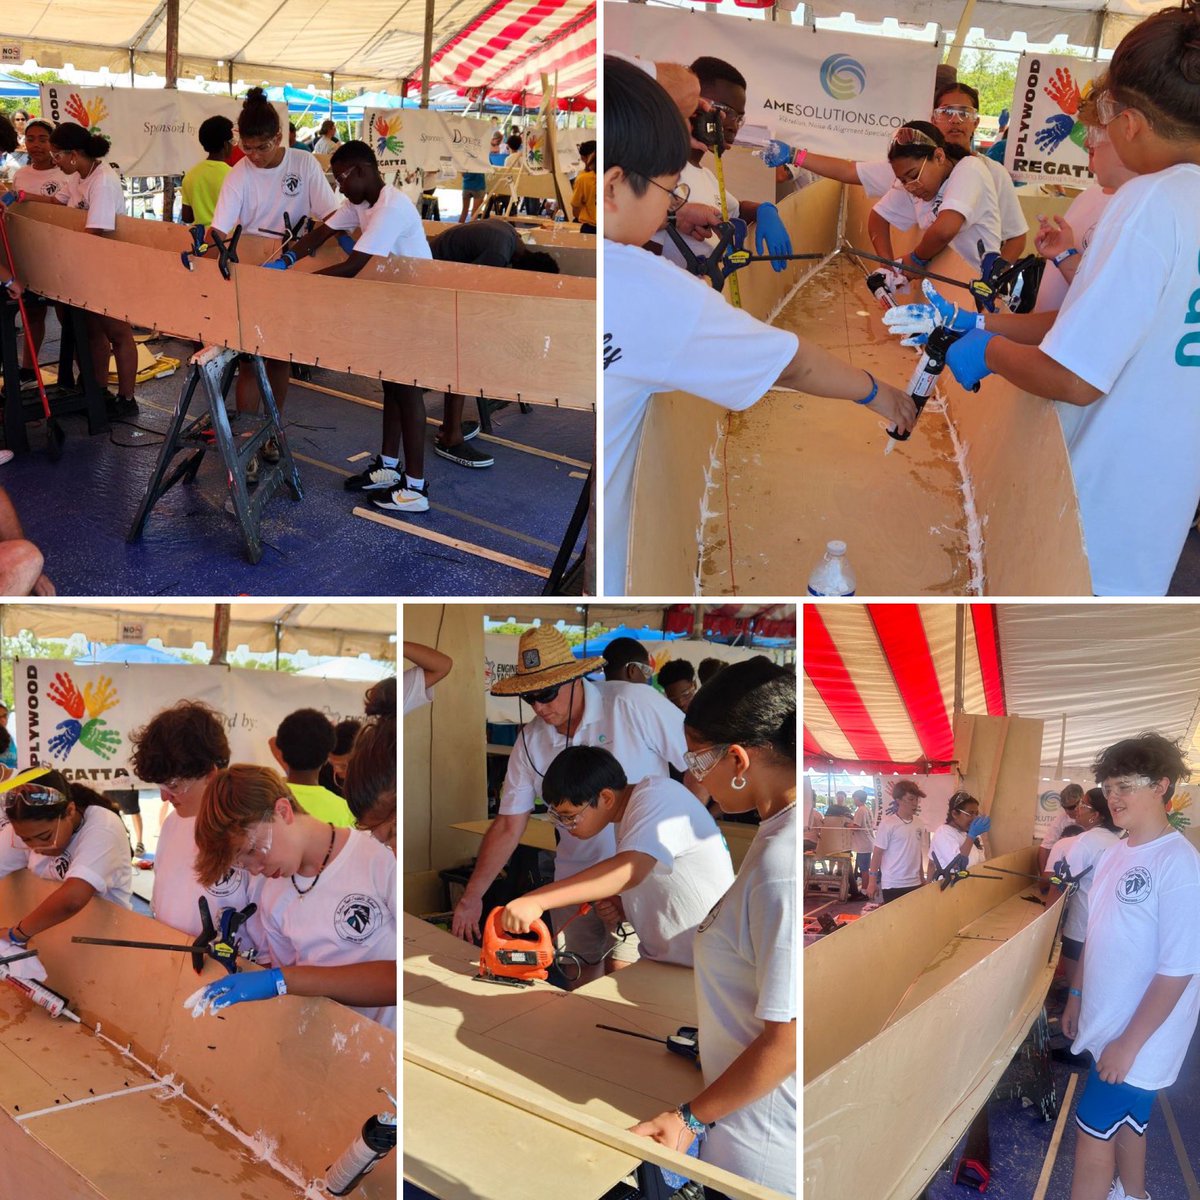 Way to go Mustangs! The students are enjoying building their boat! Almost there… @CasablancaMs @STMSPrincipalT @STrailMiddle @NadineMSmithh @BCPS_South @AlanStraussbcps